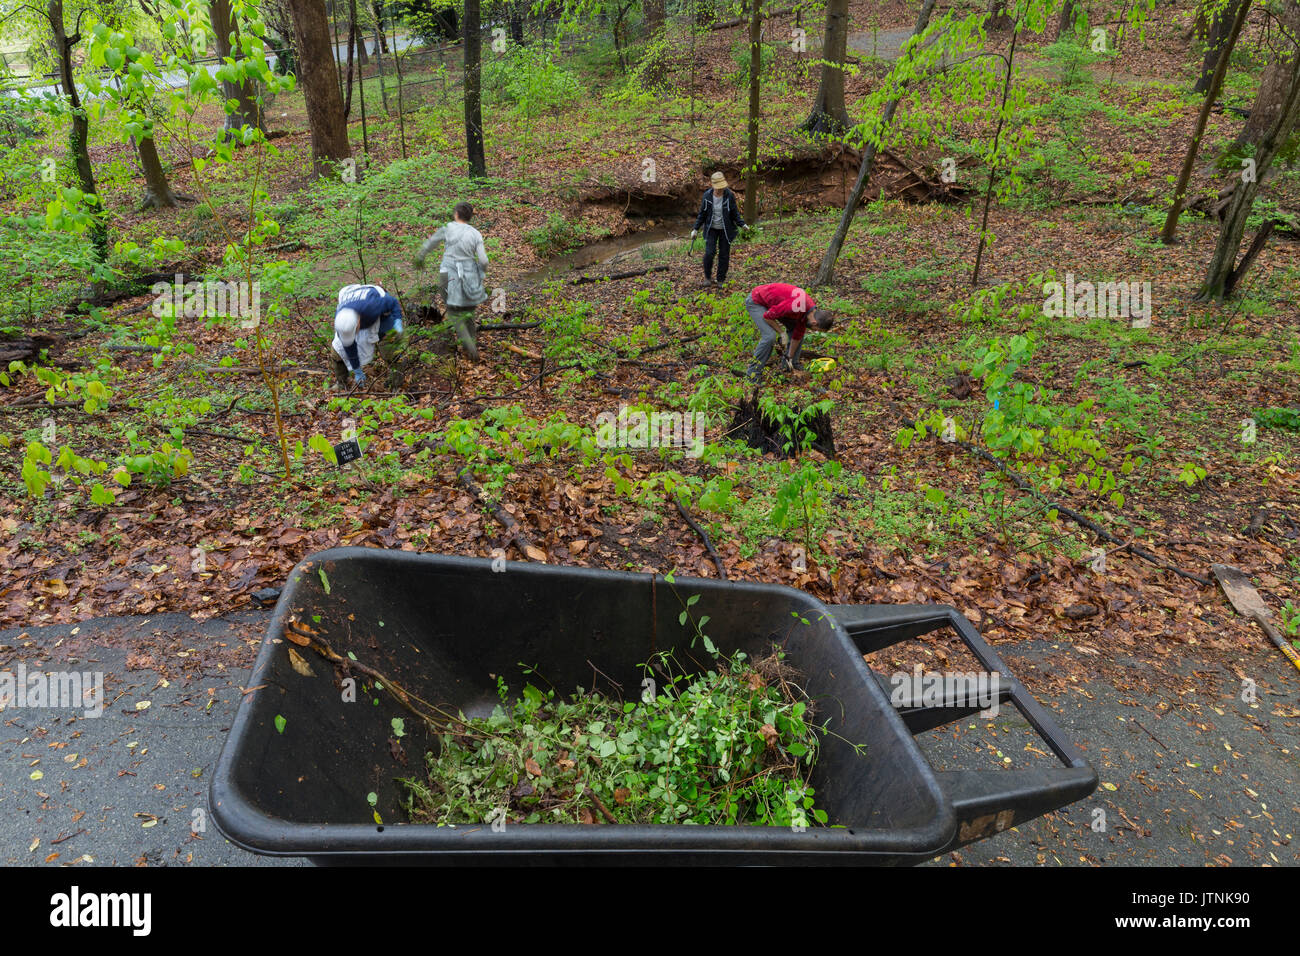 Volunteers removing invasive species, Fernbank Forest, Atlanta, Georgia. Fernbank Forest is a 65-acre urban old-growth Piedmont forest in downtown Atlanta, Georgia Stock Photo